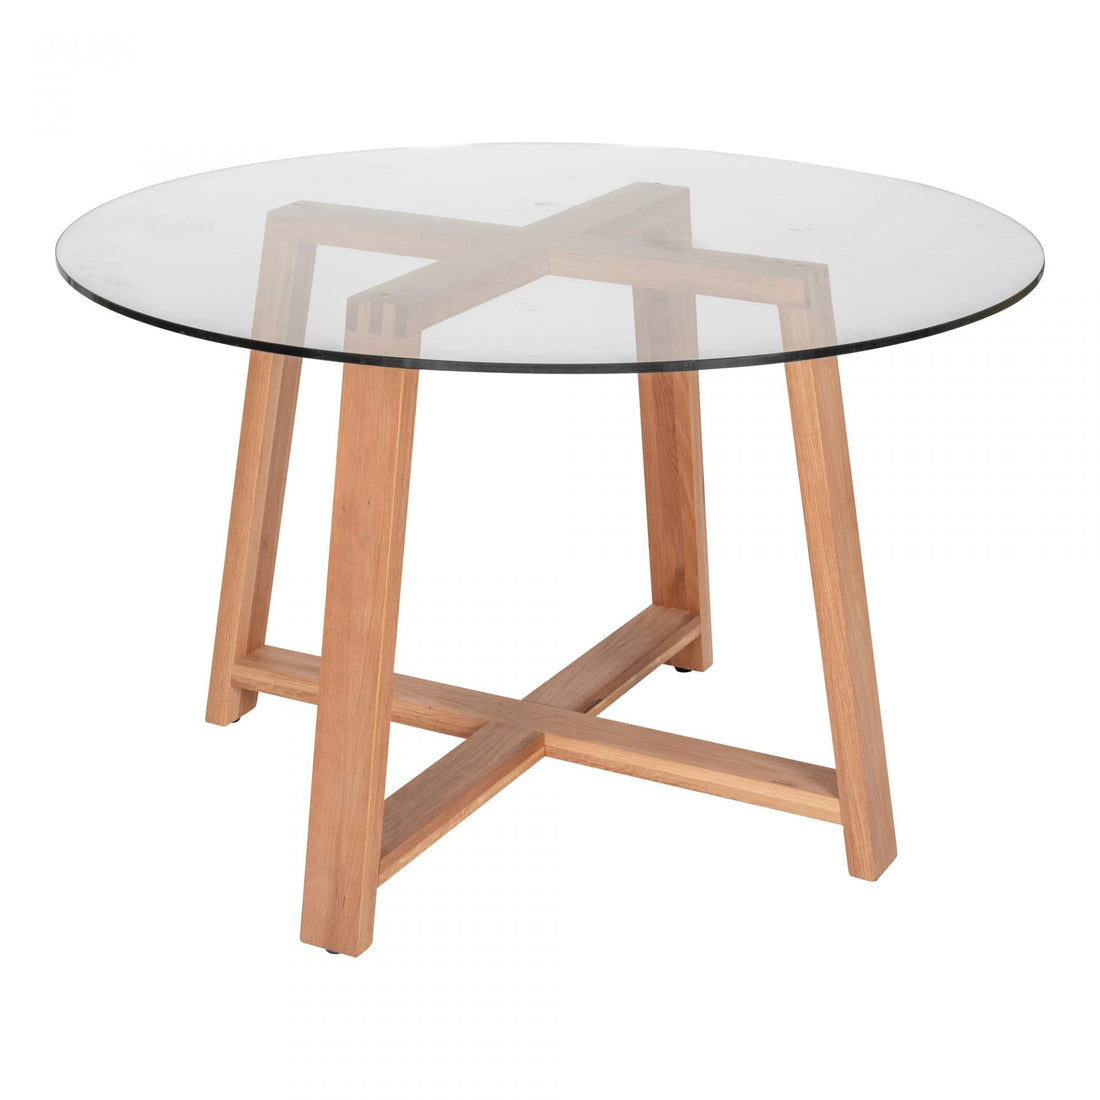 Maleo Round Dining Table: Round Dining Charm